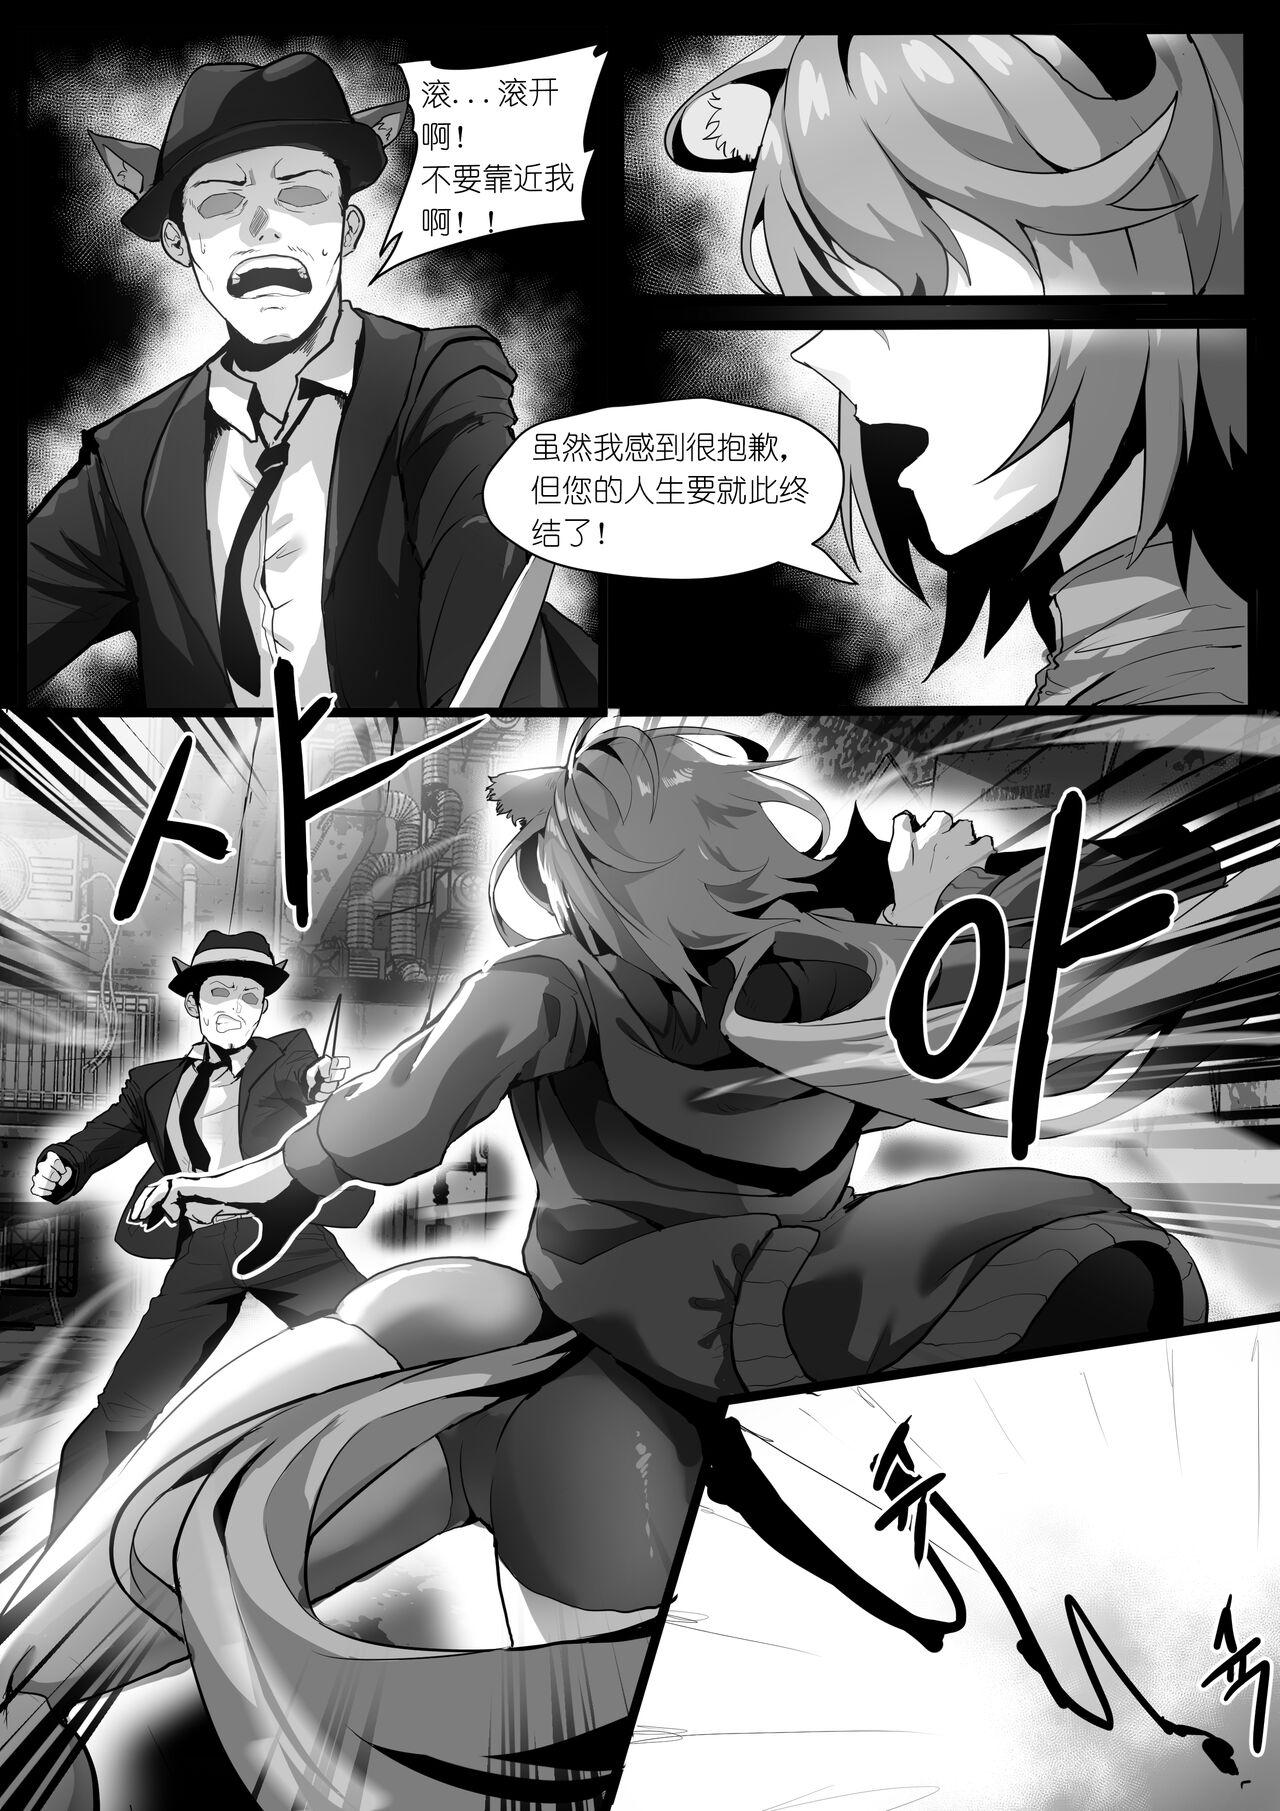 Jerkoff 欲望方舟记录3 - Arknights Freckles - Page 9